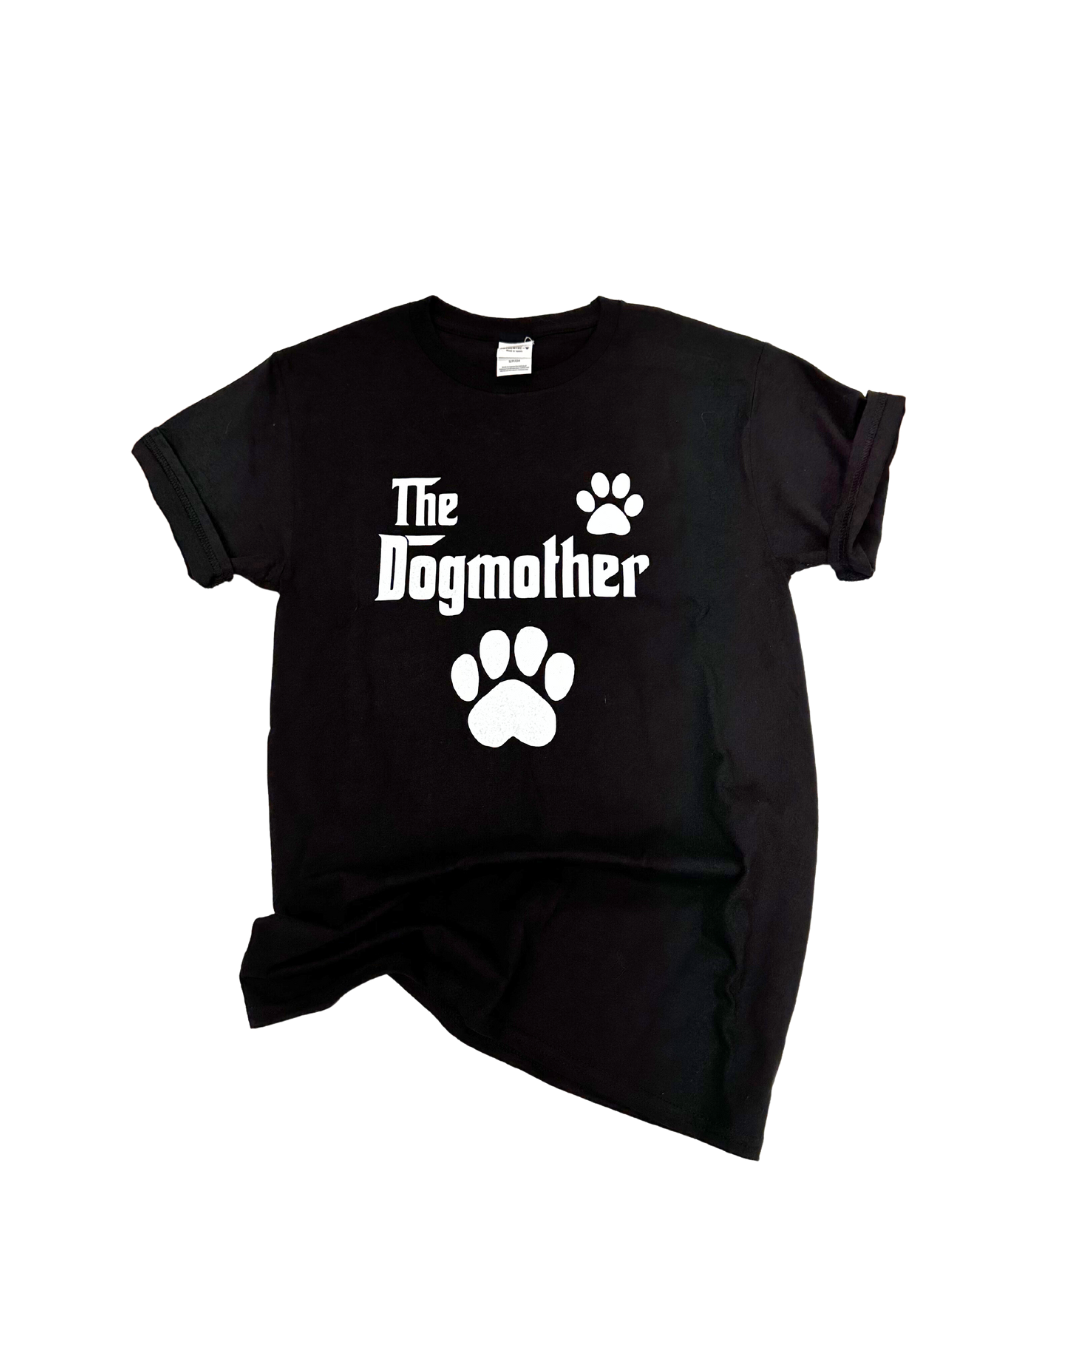 The Dog Mother T-shirt